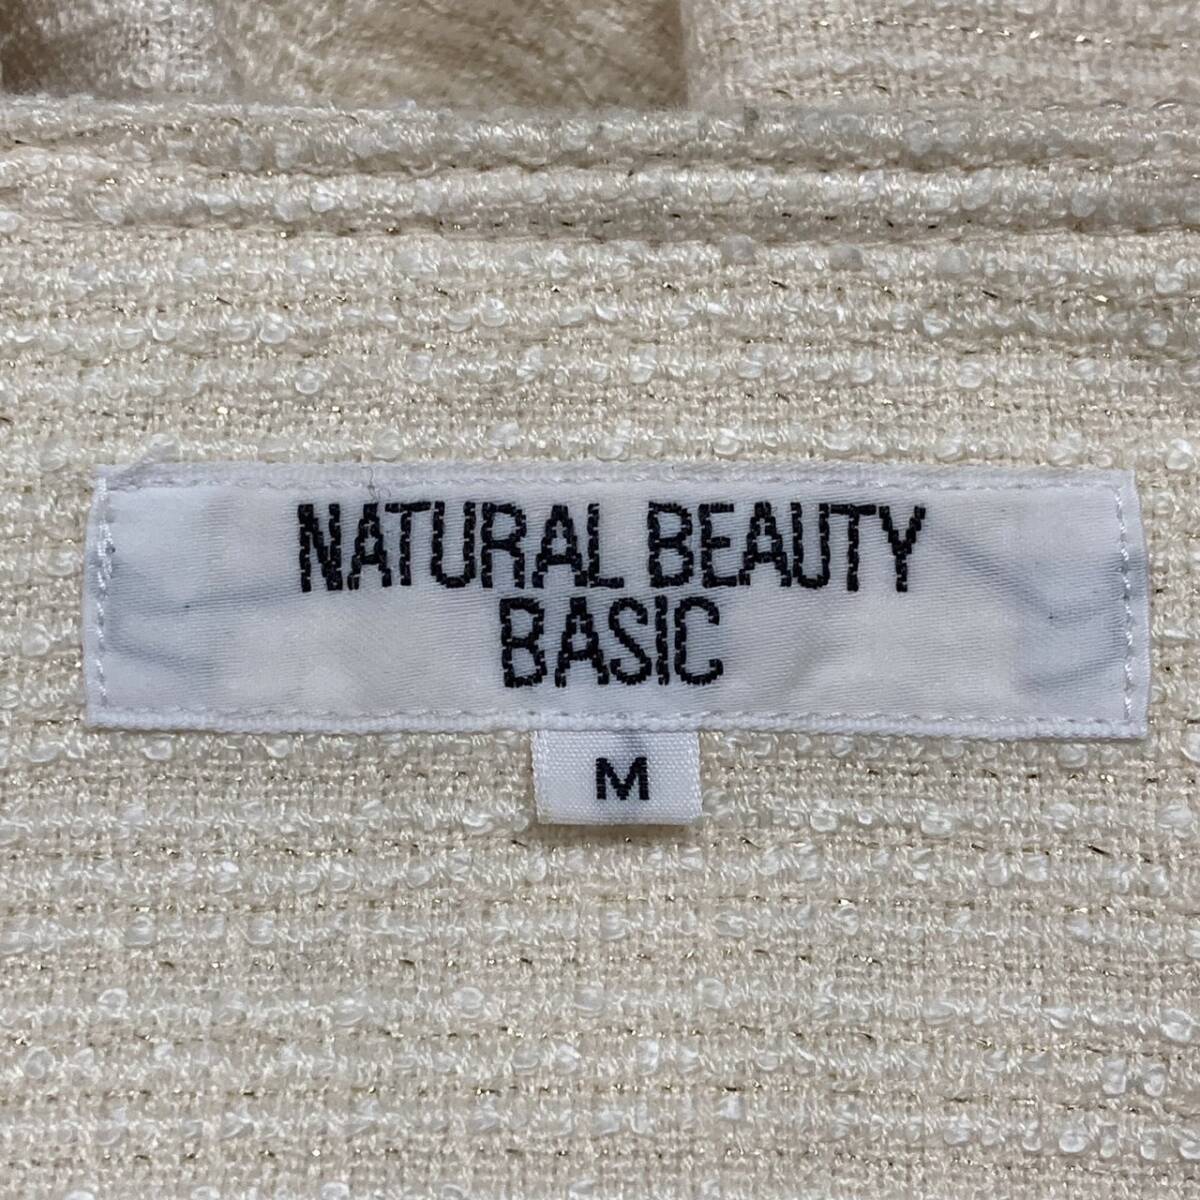 ☆7516S7517S☆ NATURAL BEAUTY BASIC セットアップ_画像3